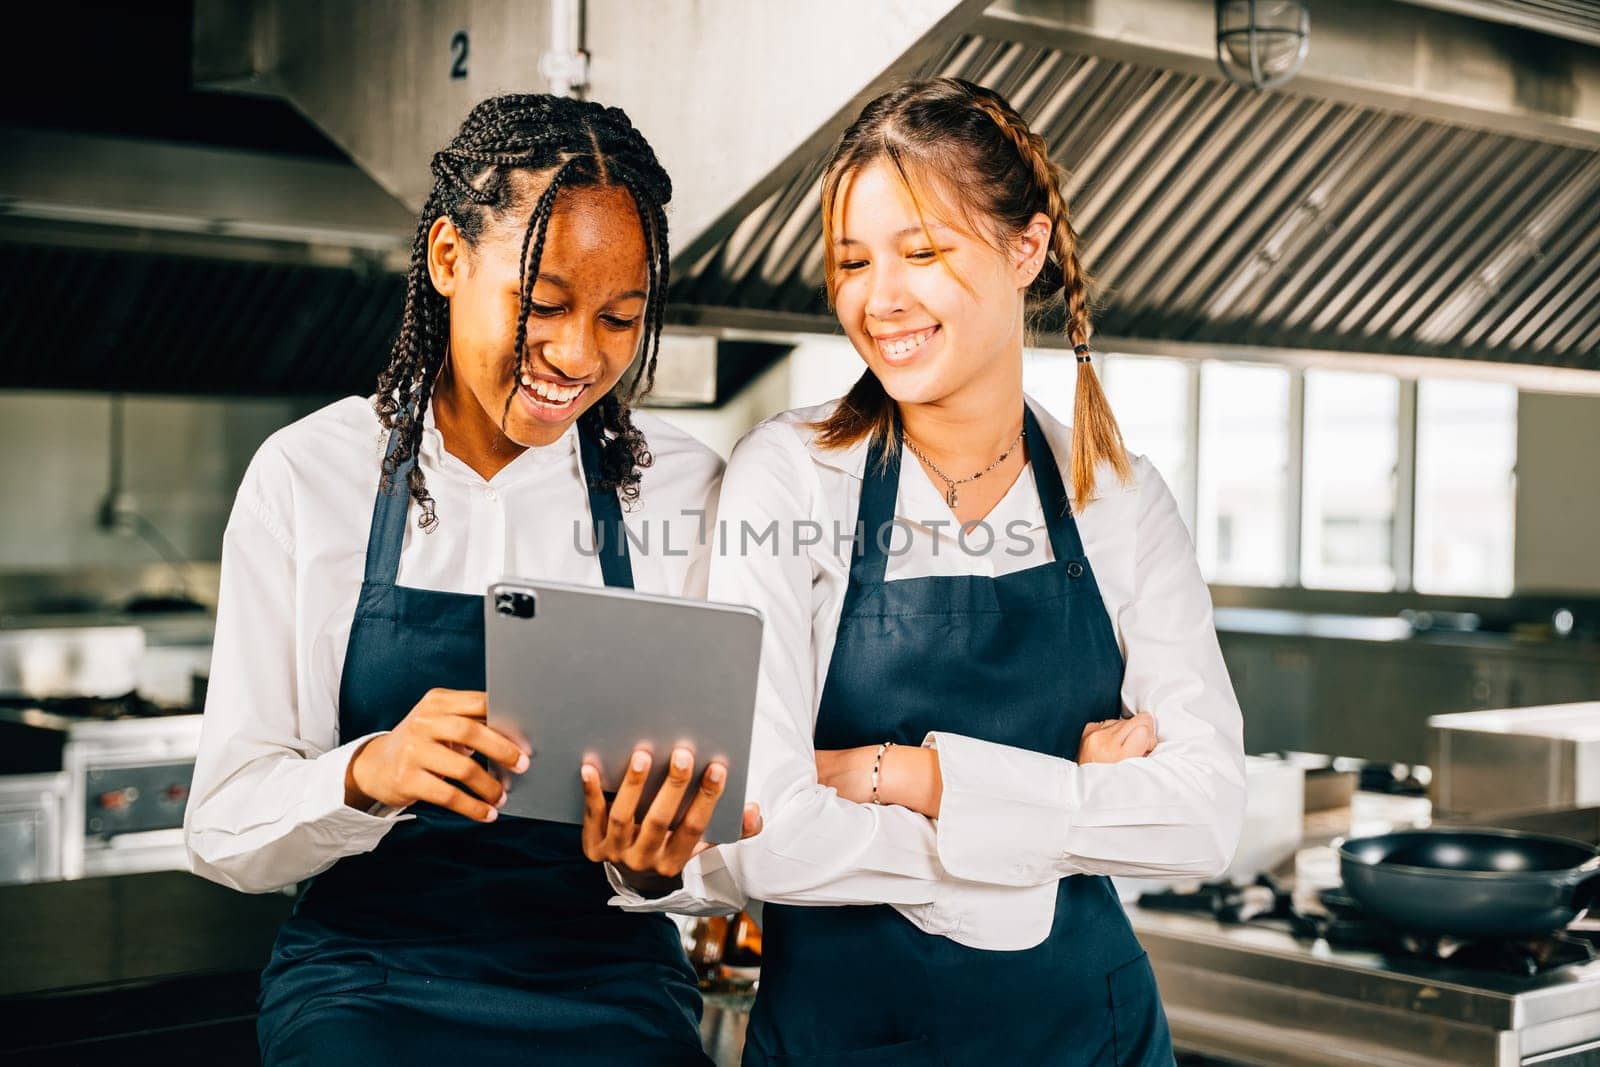 Two famous chefs in stainless steel kitchen discuss video blog using tablet. Professionals smiling standing reading searching. Modern technology in restaurant industry holding device. by Sorapop